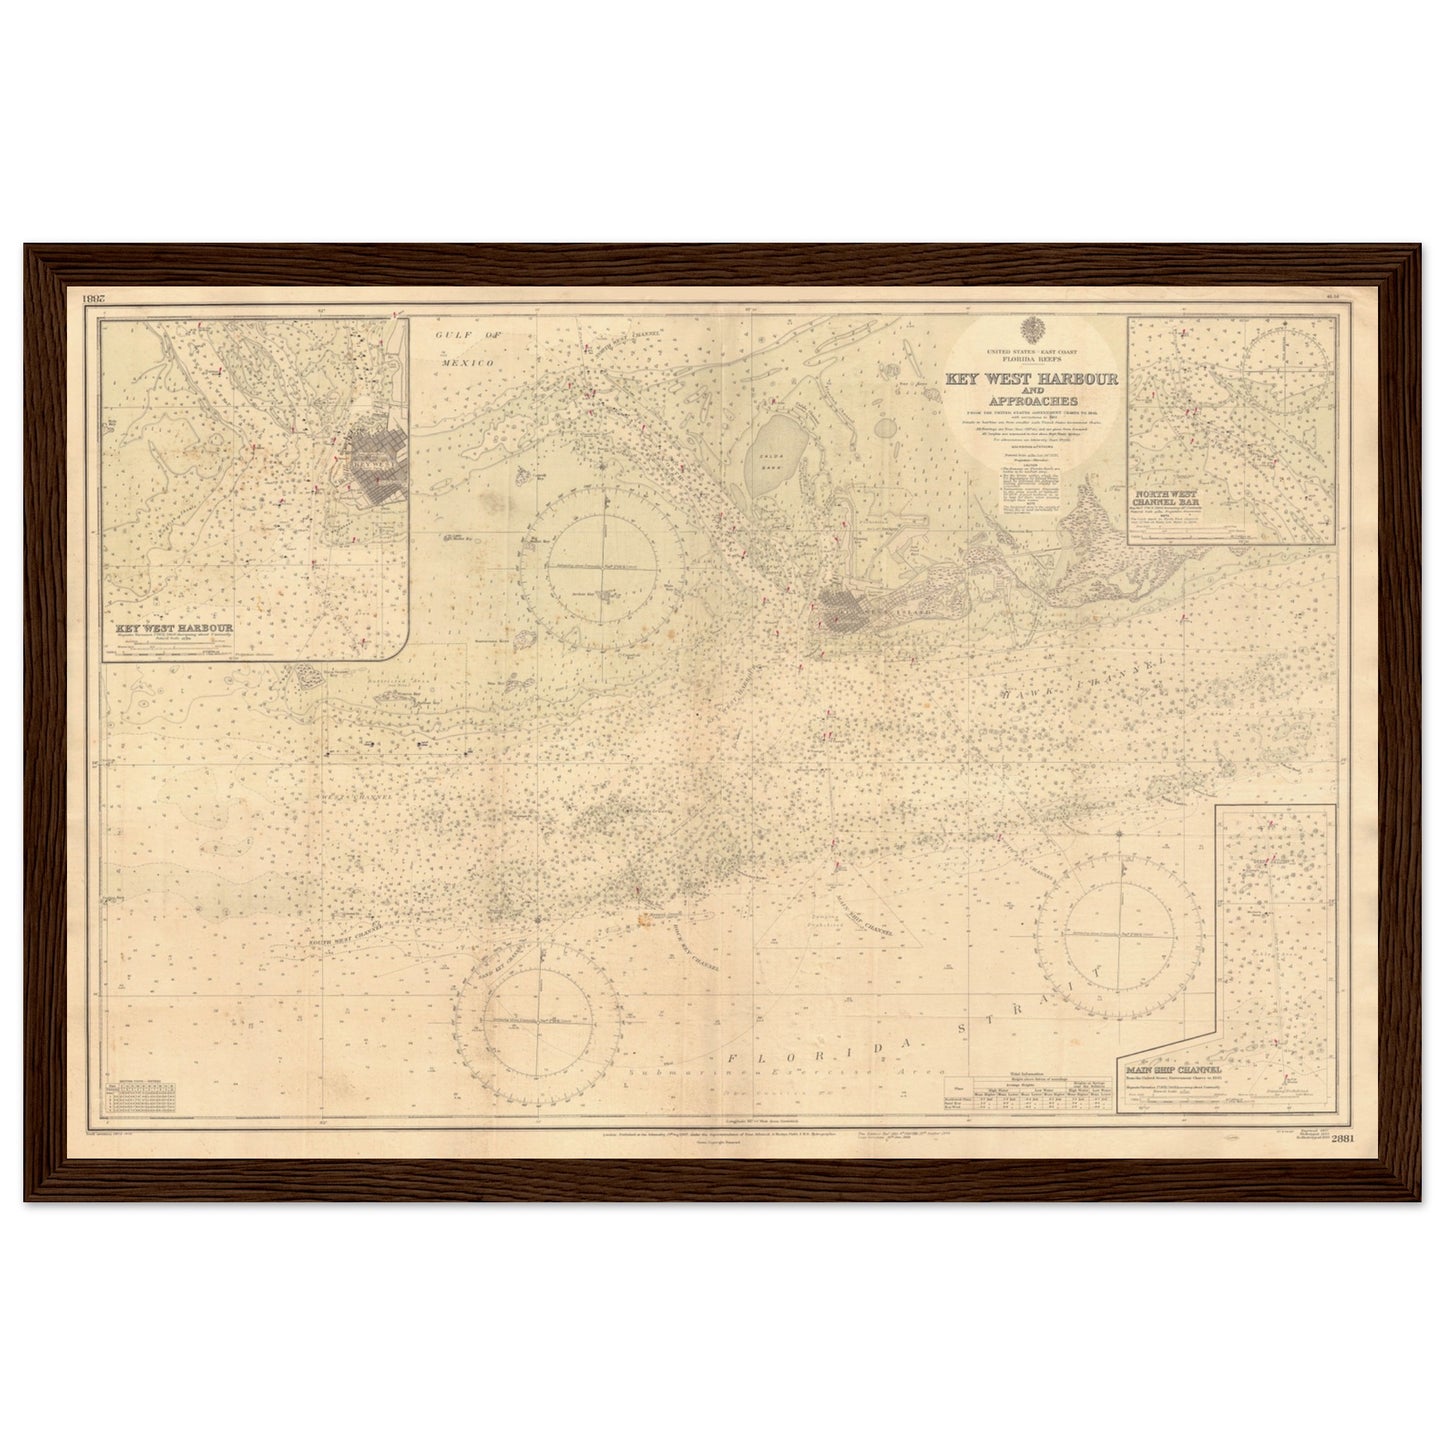 1907 Key West nautical chart created by the British Admiralty.